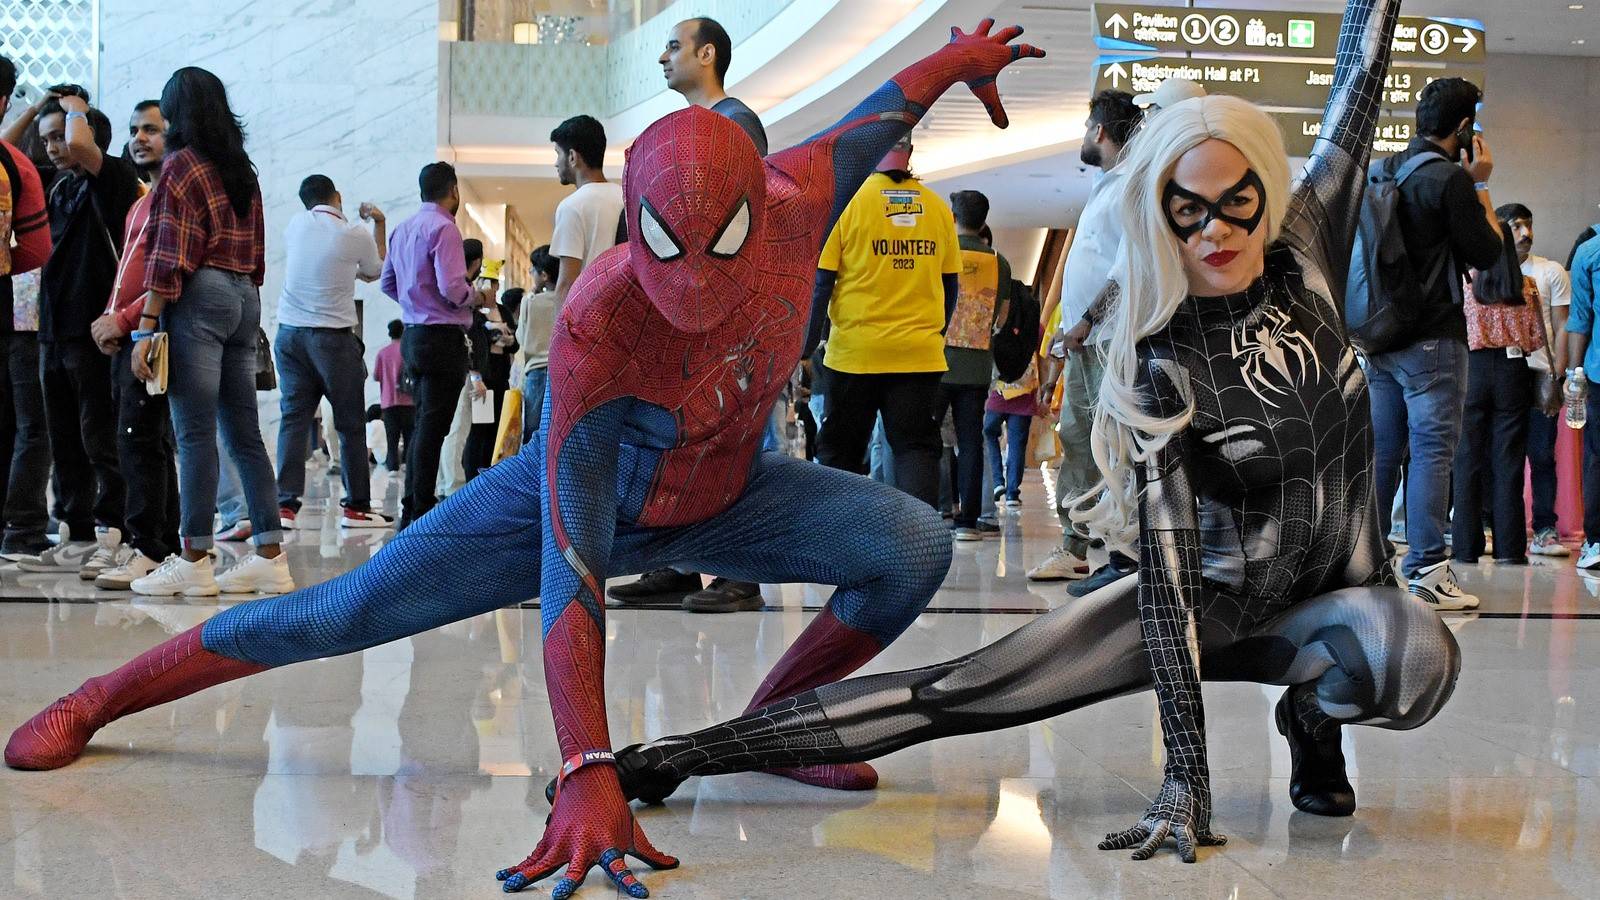 Emerald City Comic Con attendees dressed as spiderman (Photo credit MyNorthwest)